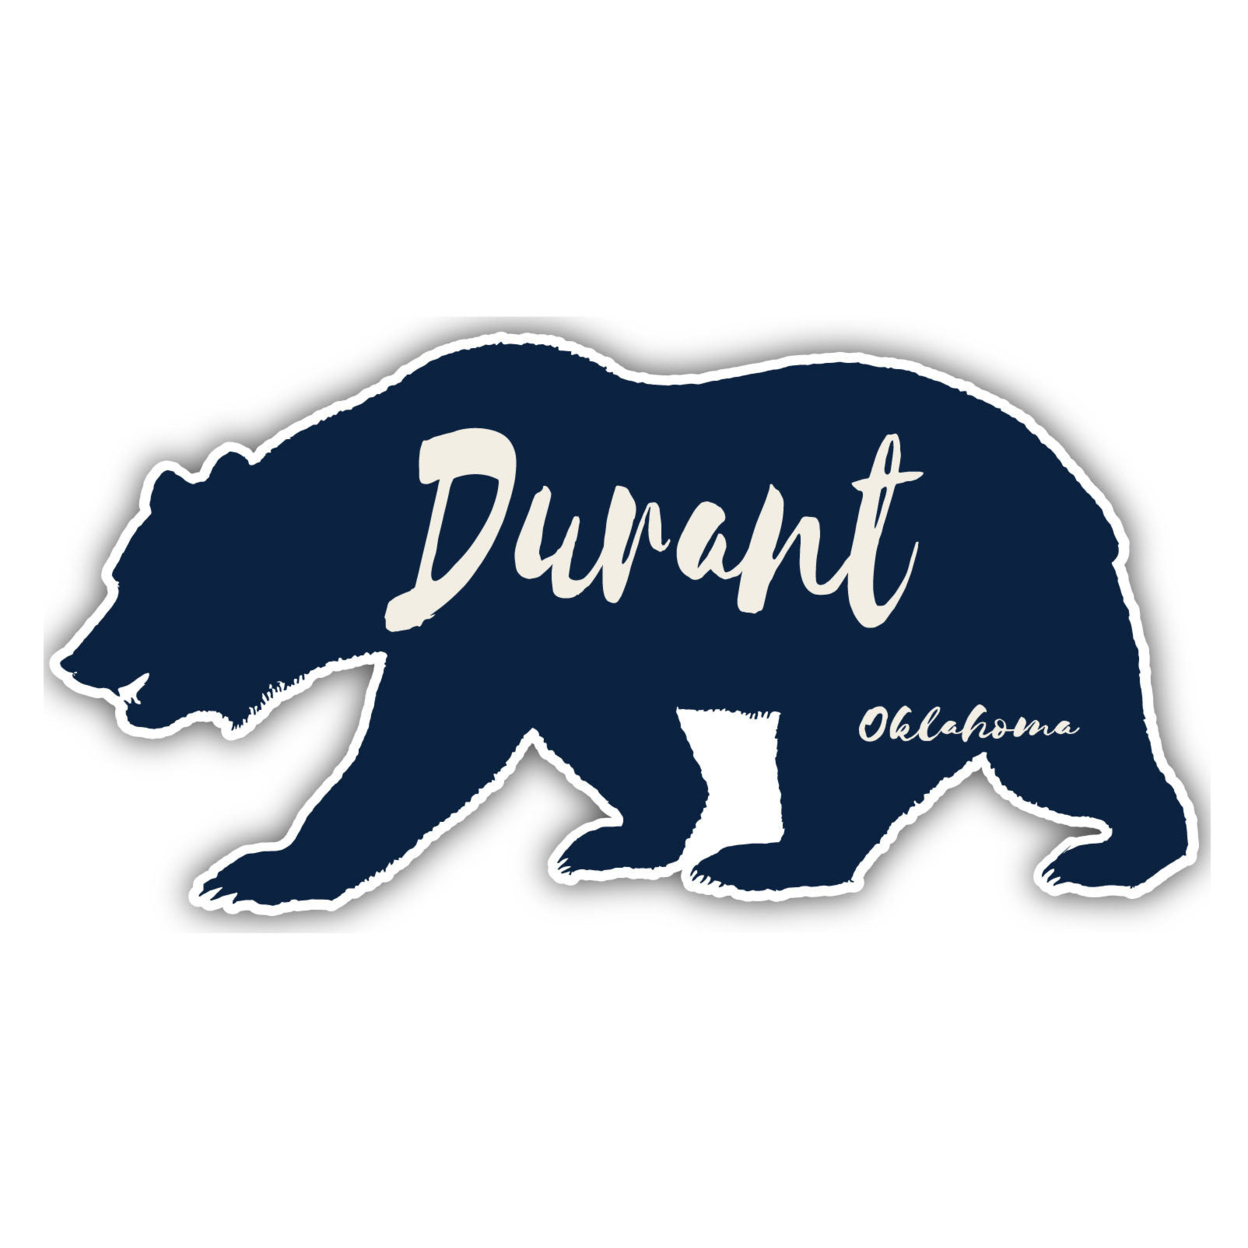 Durant Oklahoma Souvenir Decorative Stickers (Choose Theme And Size) - 4-Pack, 4-Inch, Camp Life